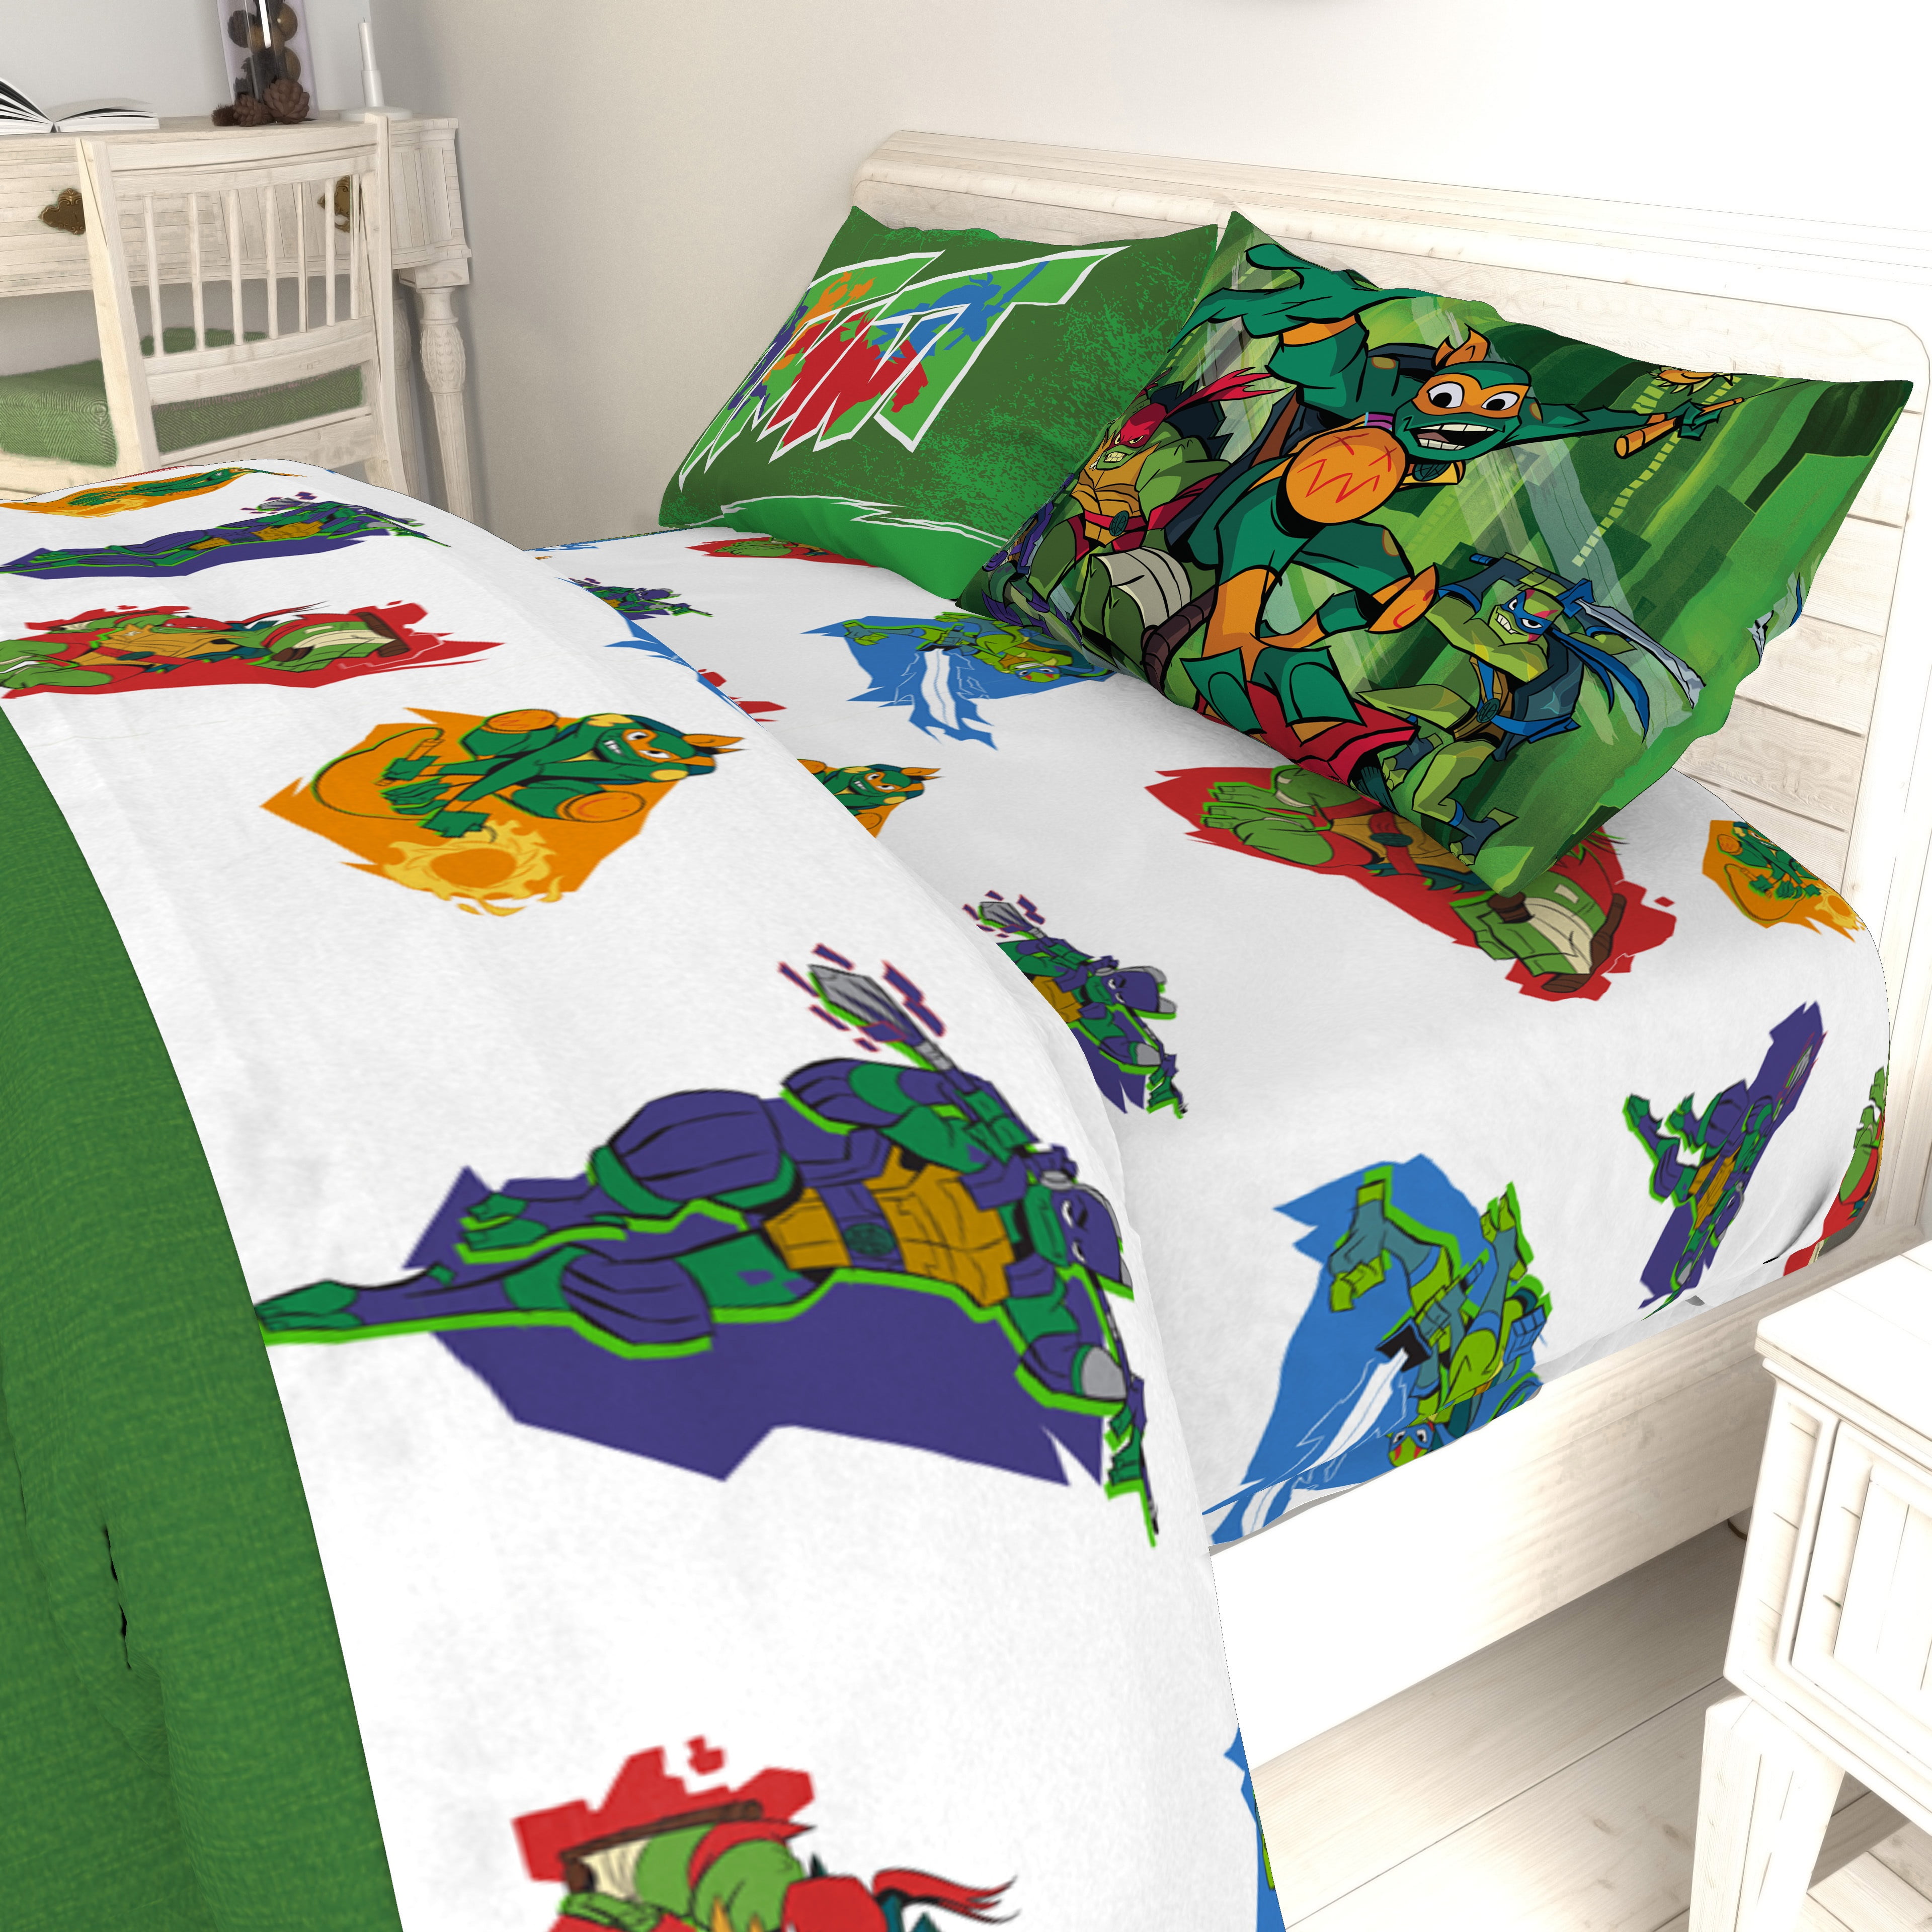 Details about   TMNT Ninja Night Twin/Full Comforter and Sham Set Toddlers Kids Room Gift New 